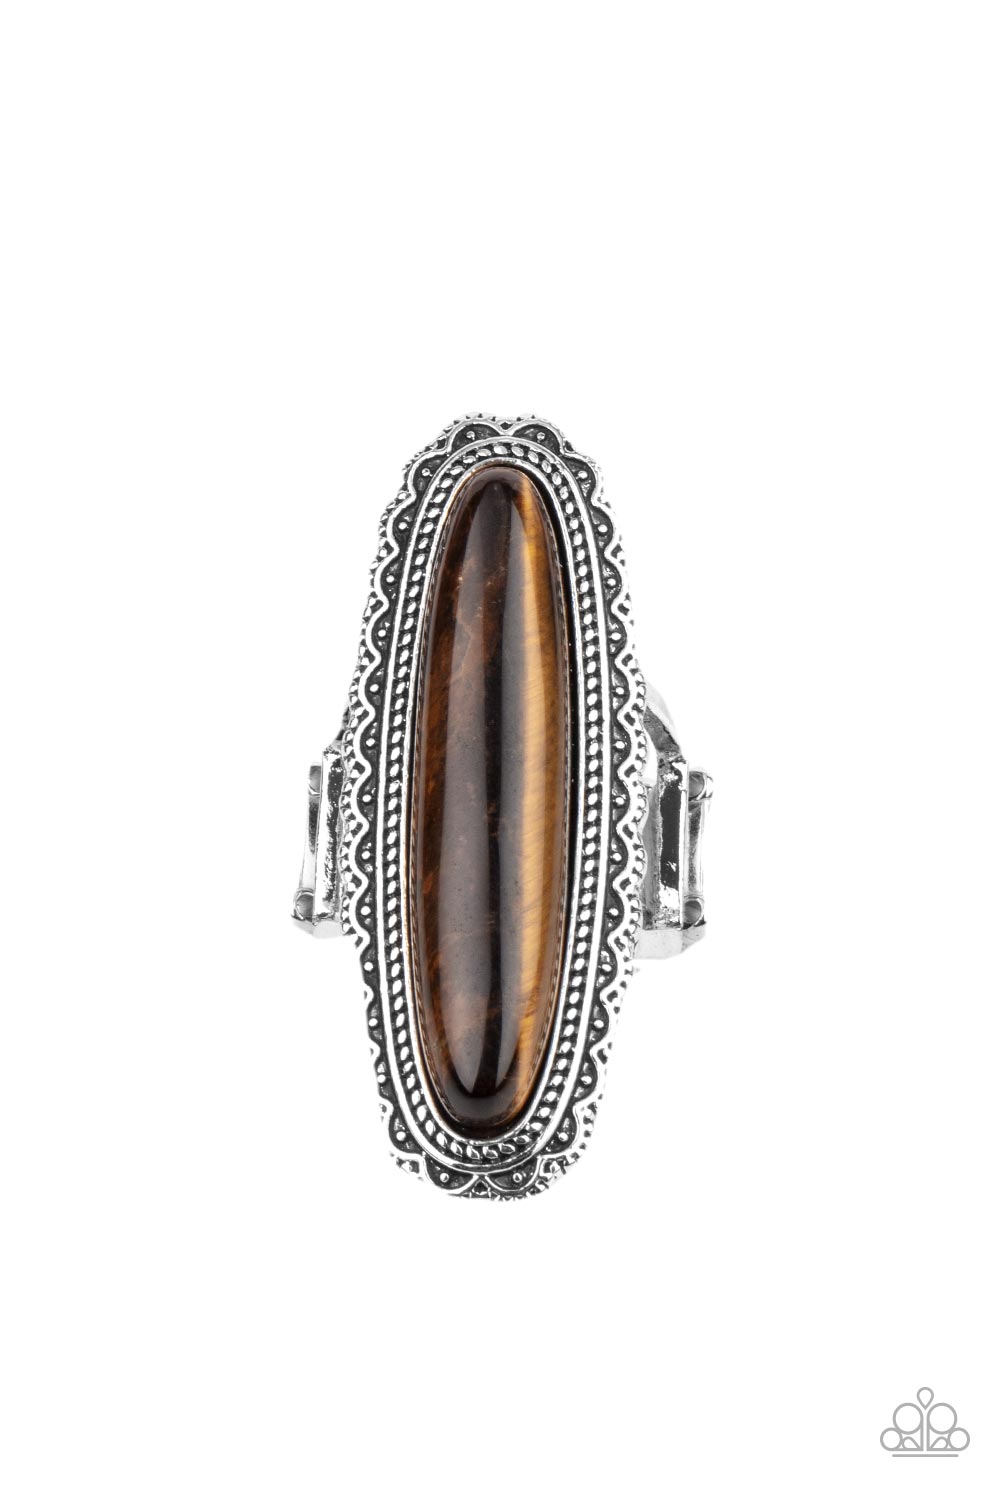 Eco Equinox Brown Tiger's Eye Stone Ring - Paparazzi Accessories- lightbox - CarasShop.com - $5 Jewelry by Cara Jewels